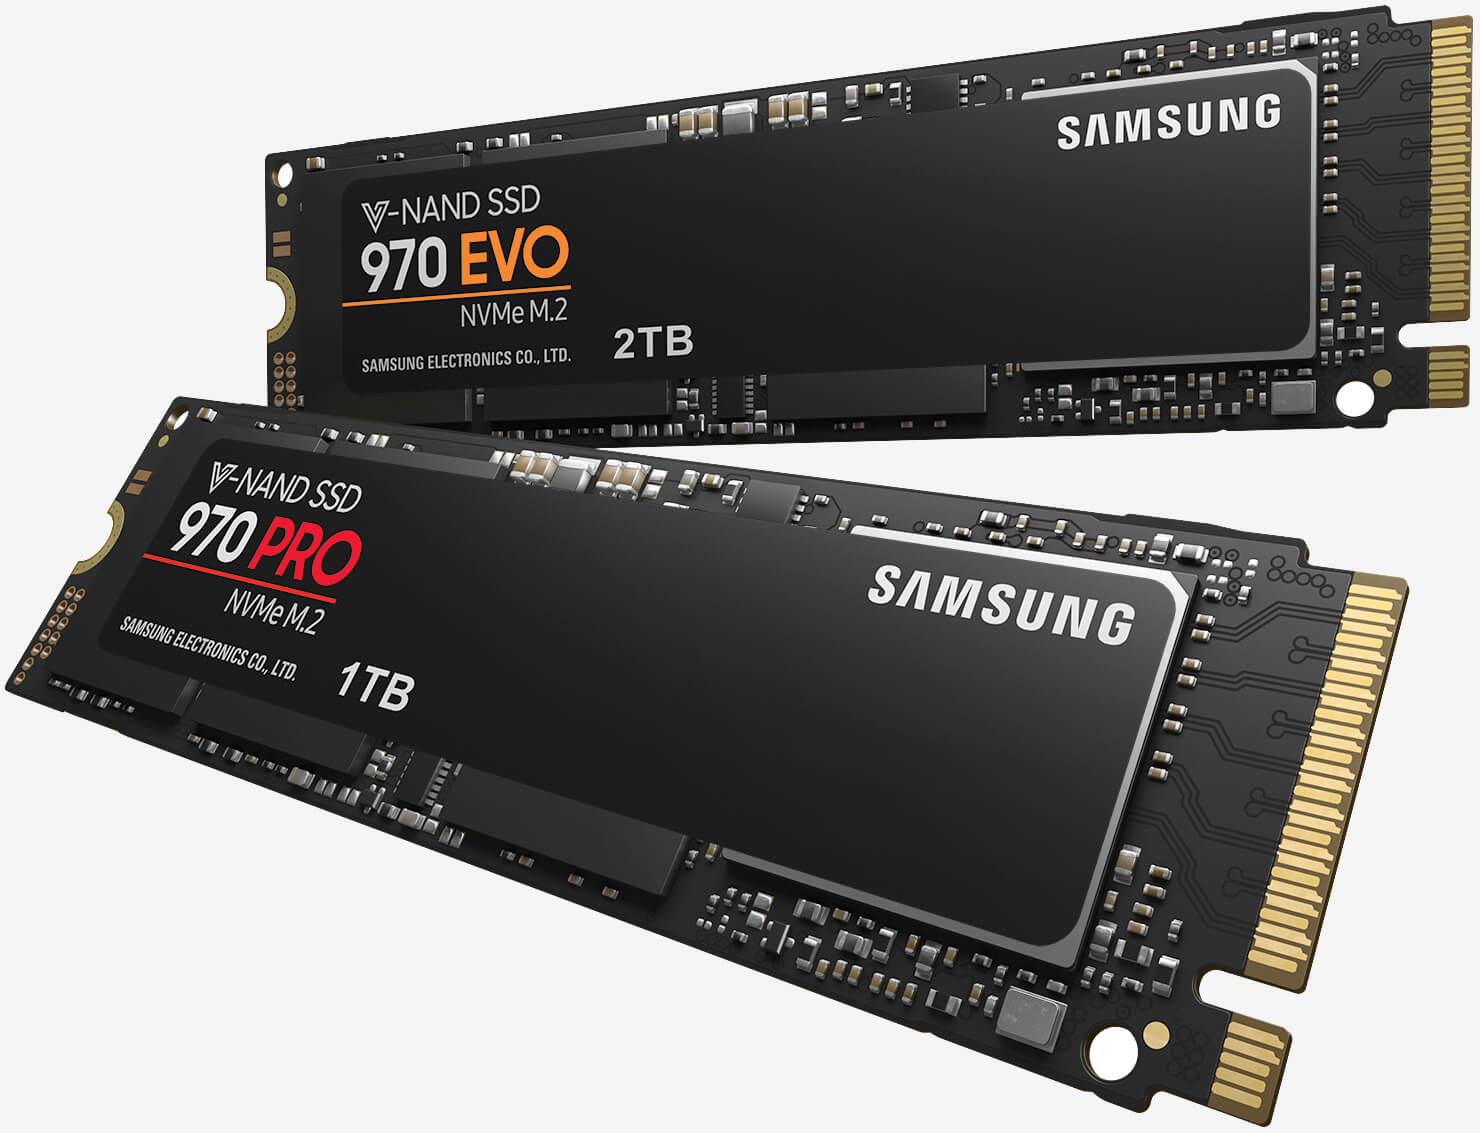 Samsung 970 Pro and 970 Evo SSDs launch well below original MSRP